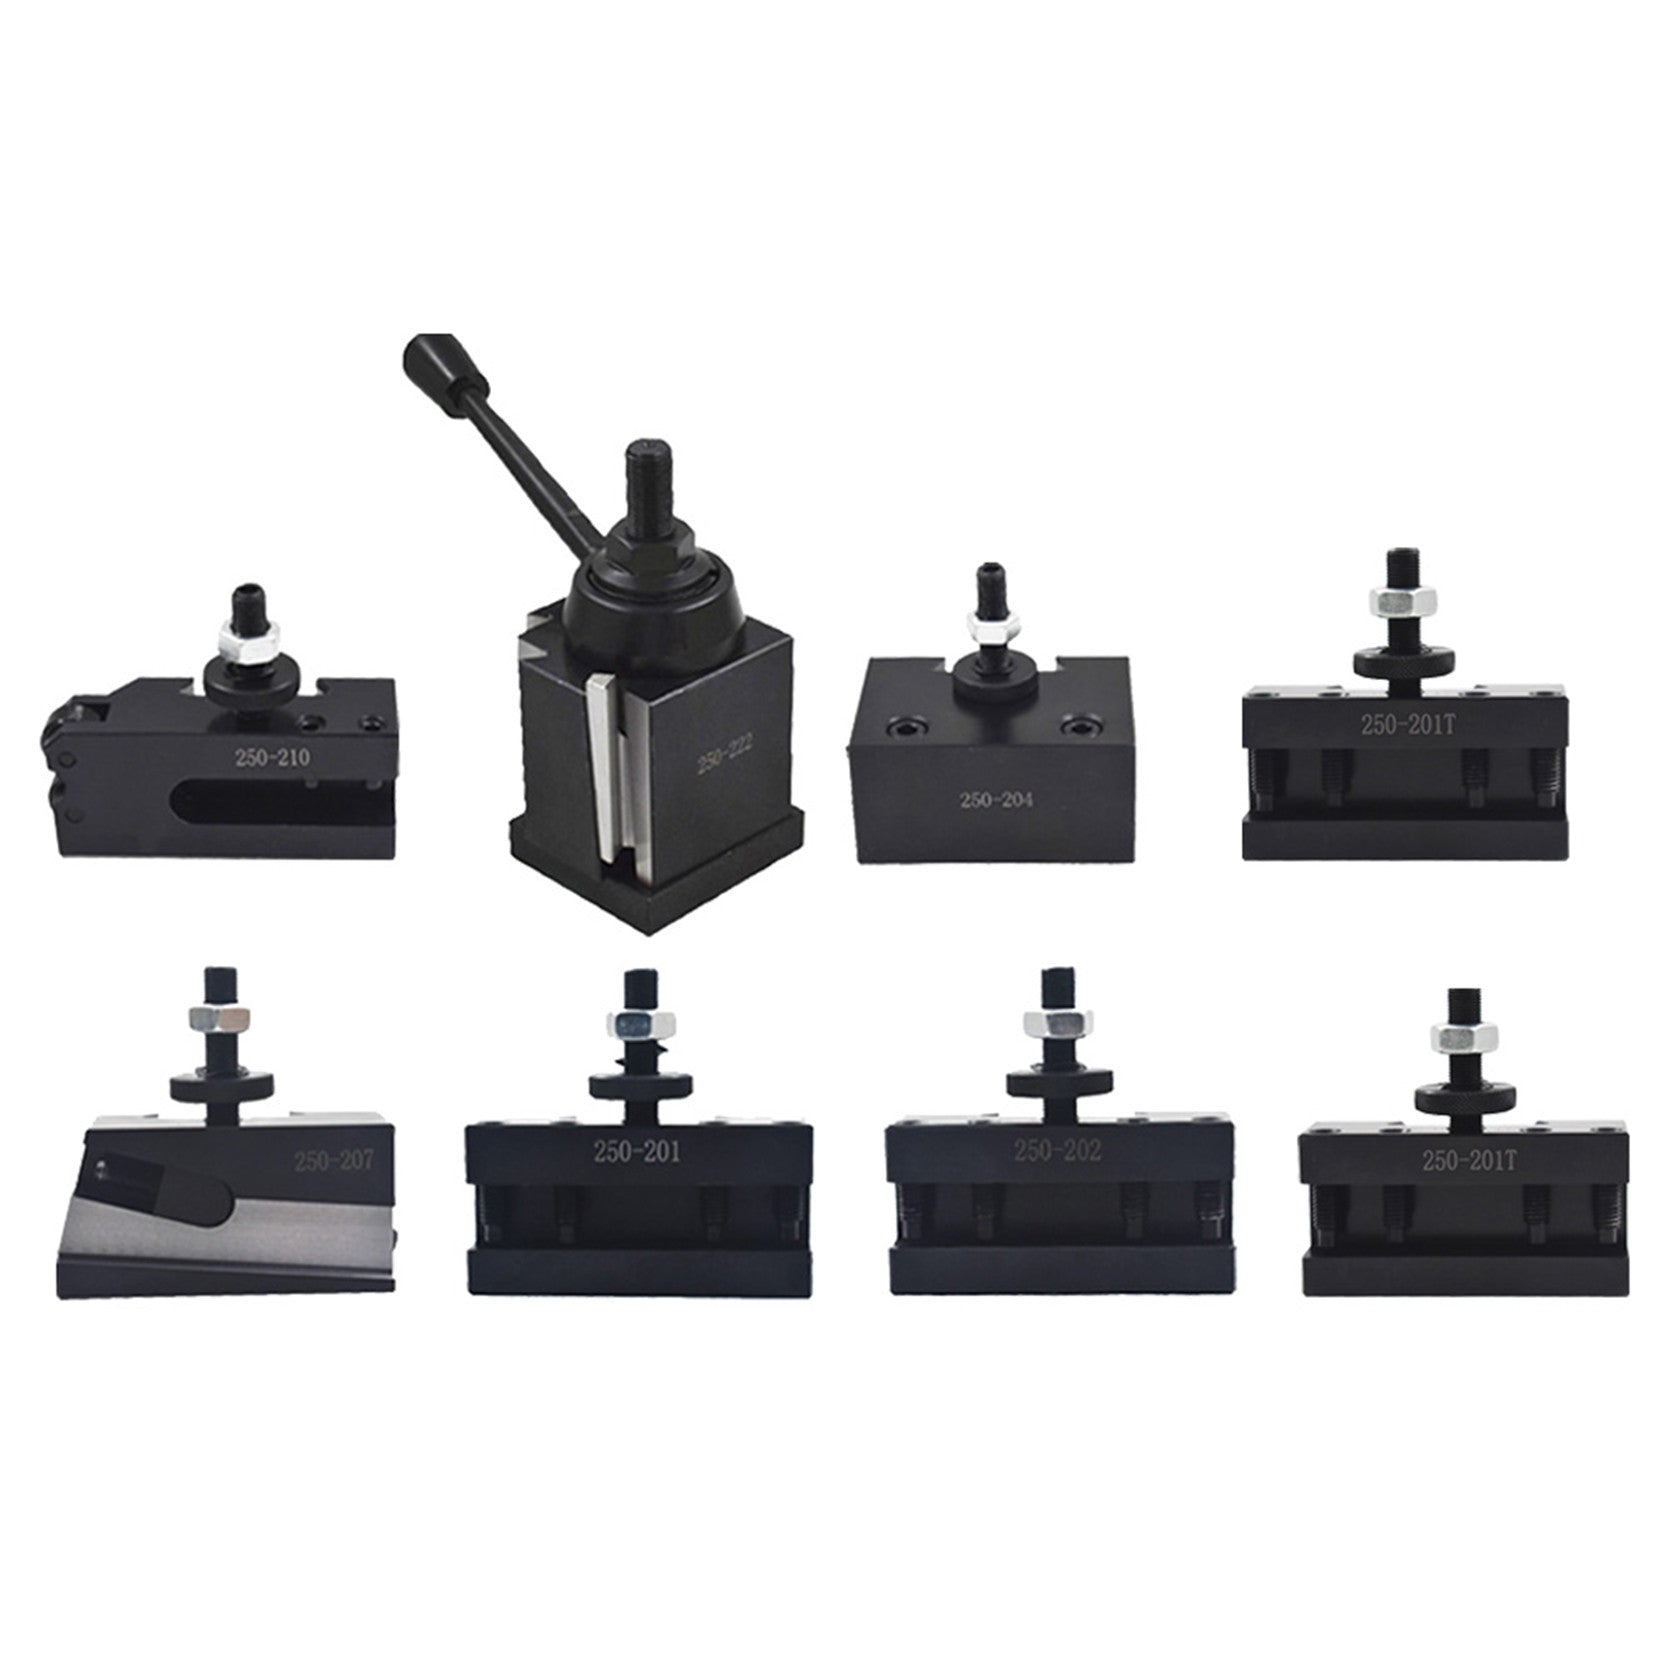 findmall Bxa 250-222 Tool Post Set QC Wedge Type Quick Change Turning and Facing Holders for Lathe Swing 10"-15" (8) FINDMALLPARTS